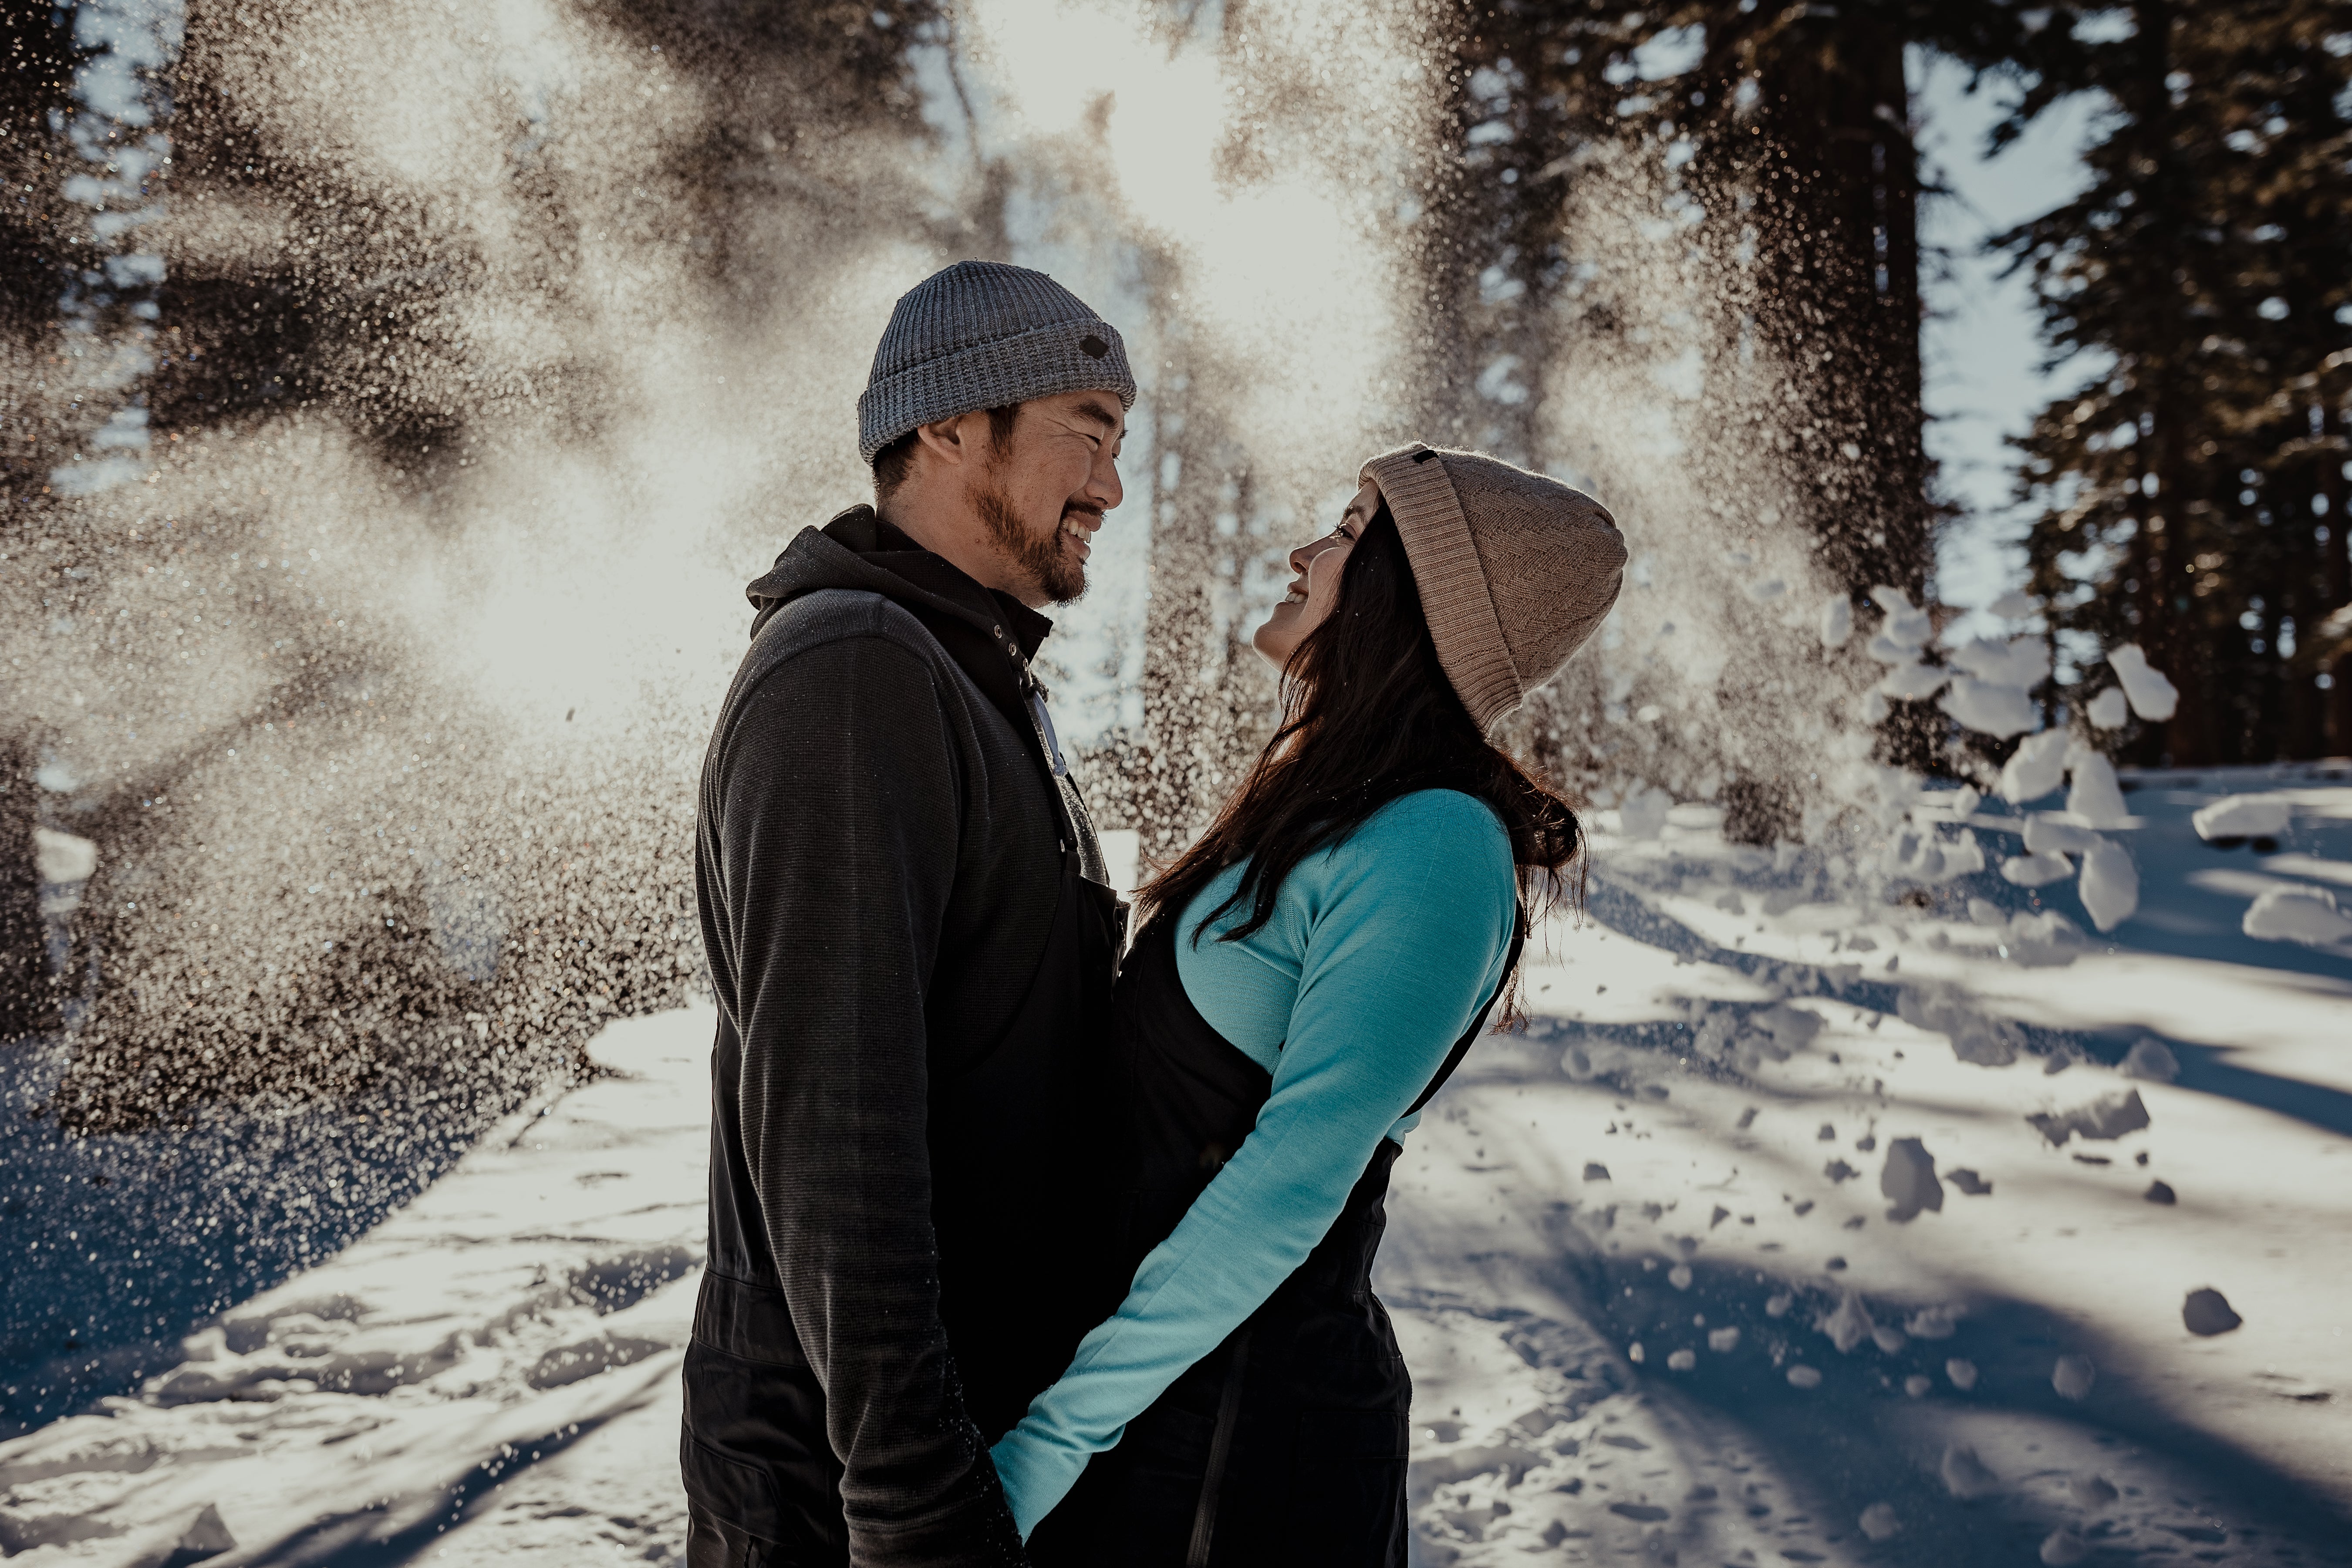 a couple wearing Ridge Merino winter layers smiles at each other while sun pours through the snowy trees in the background